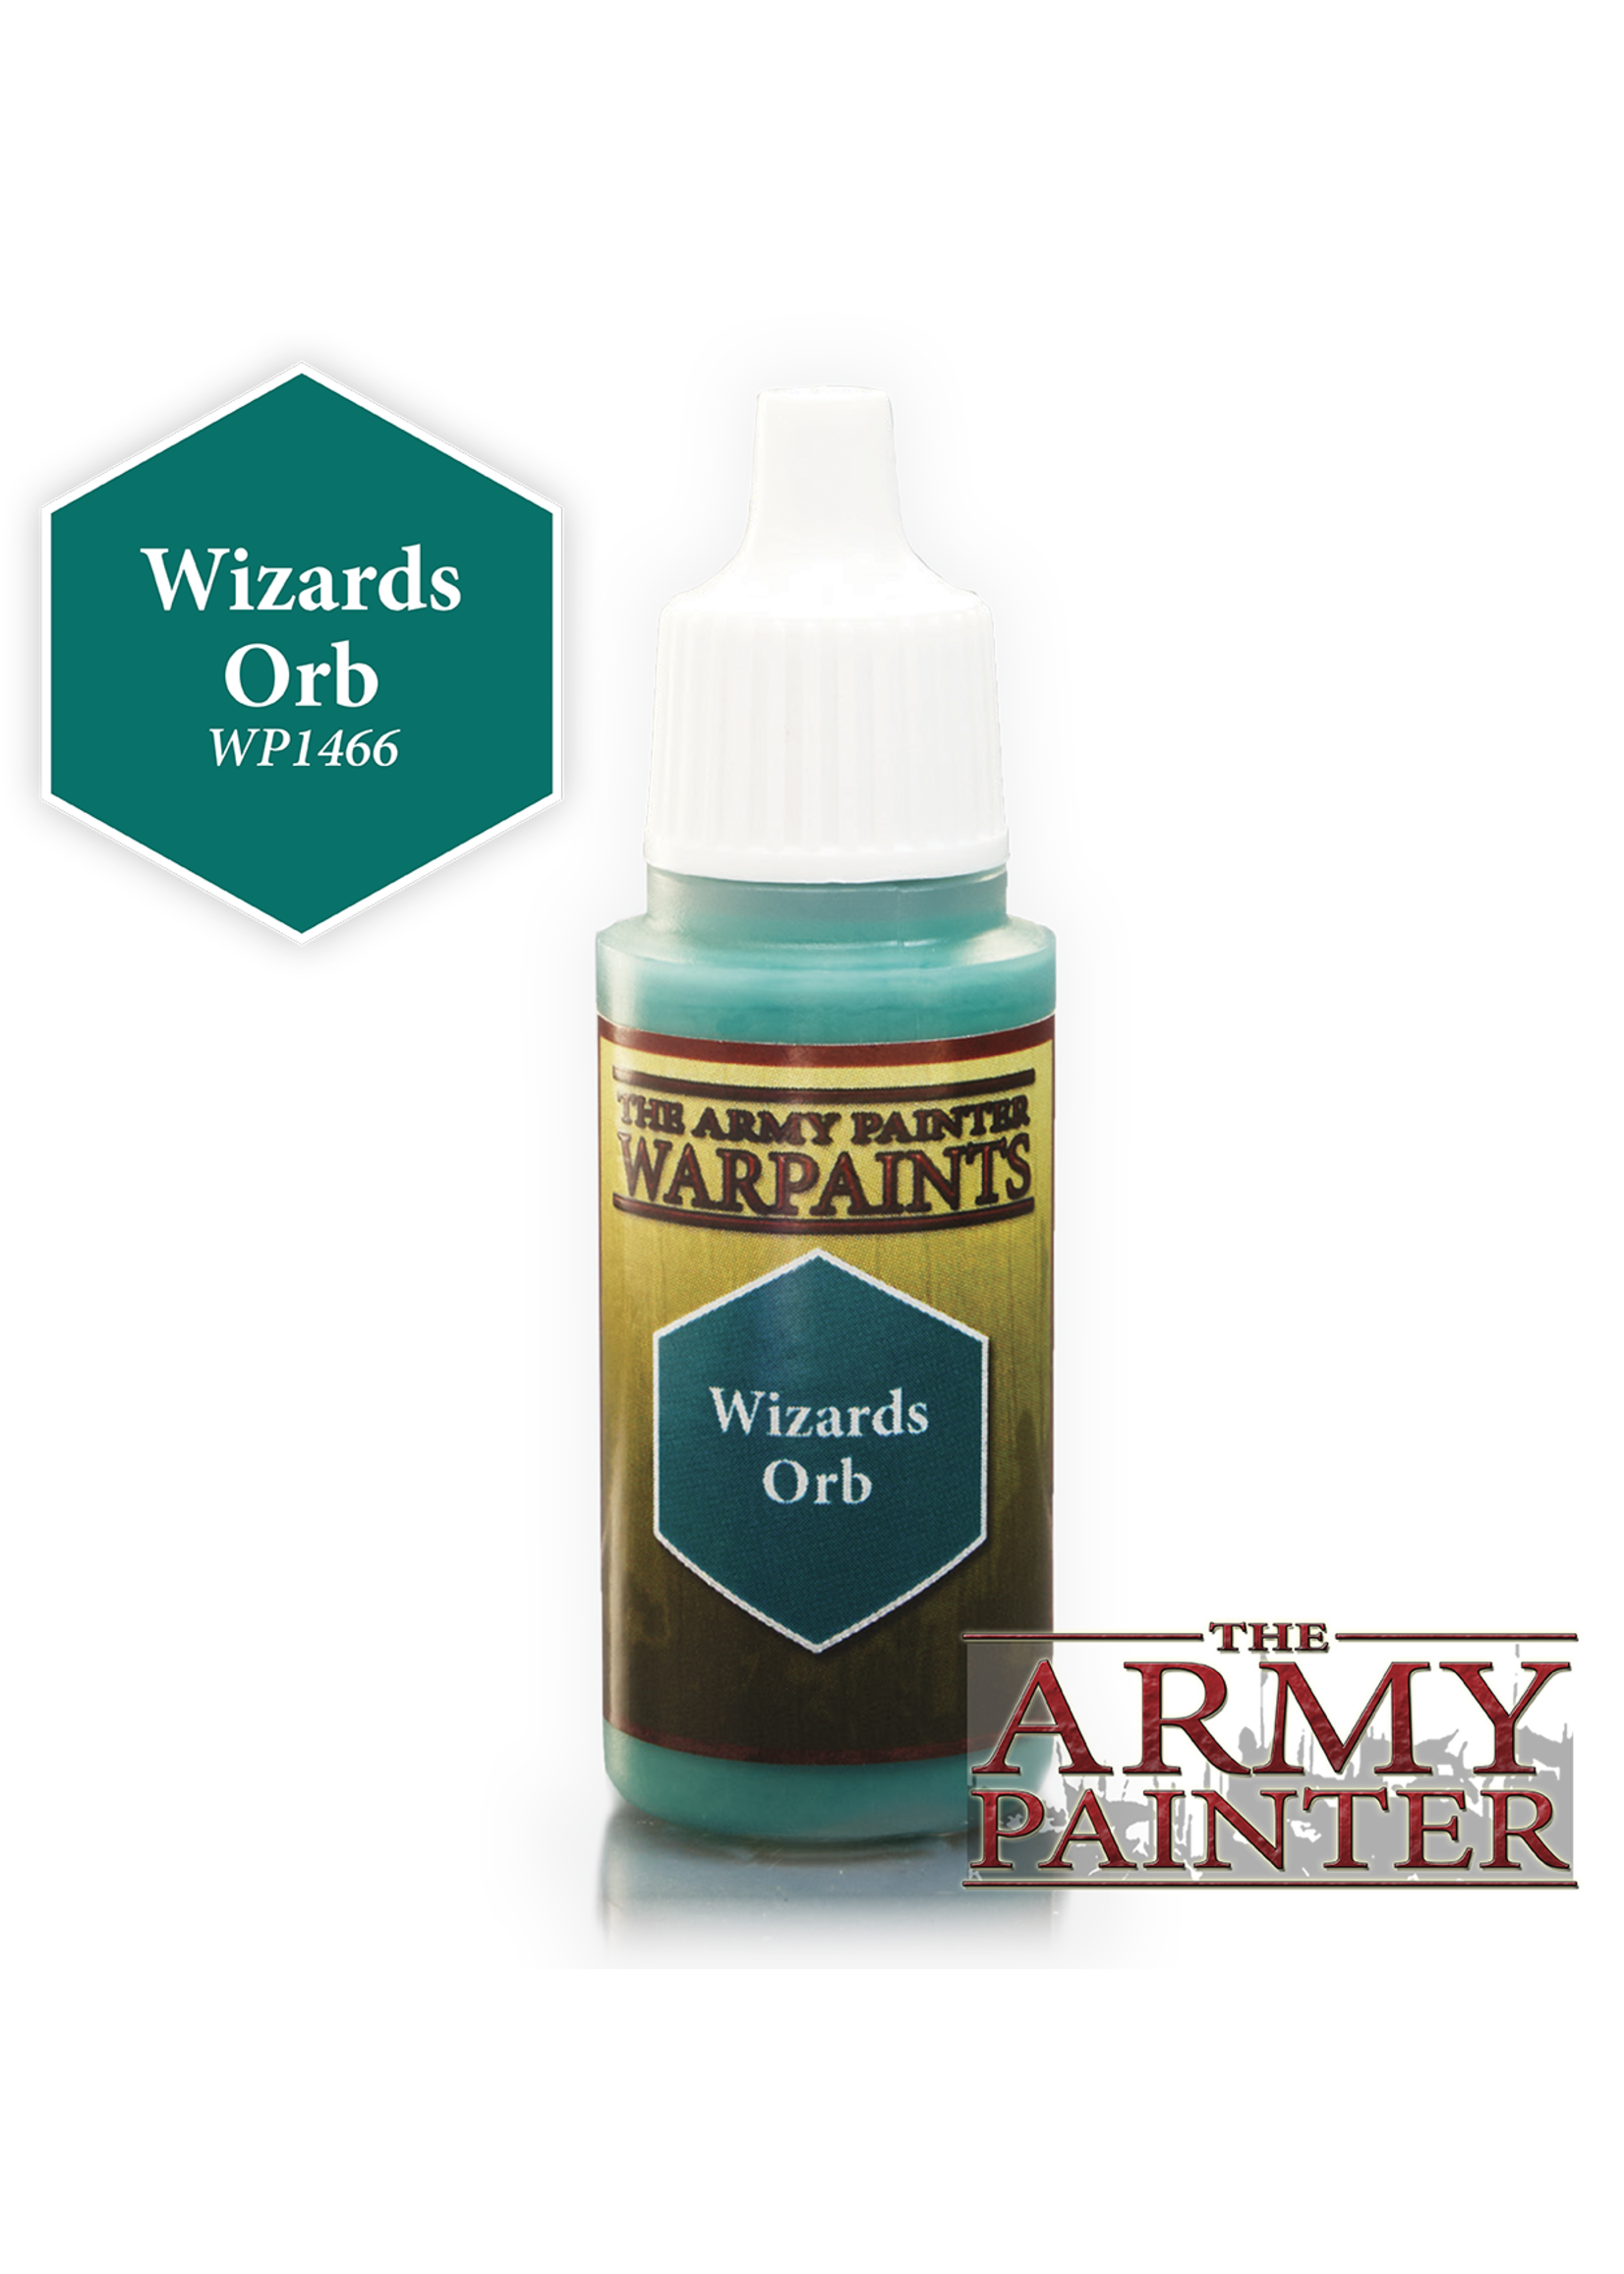 The Army Painter Acrylics Warpaints Wizards Orb